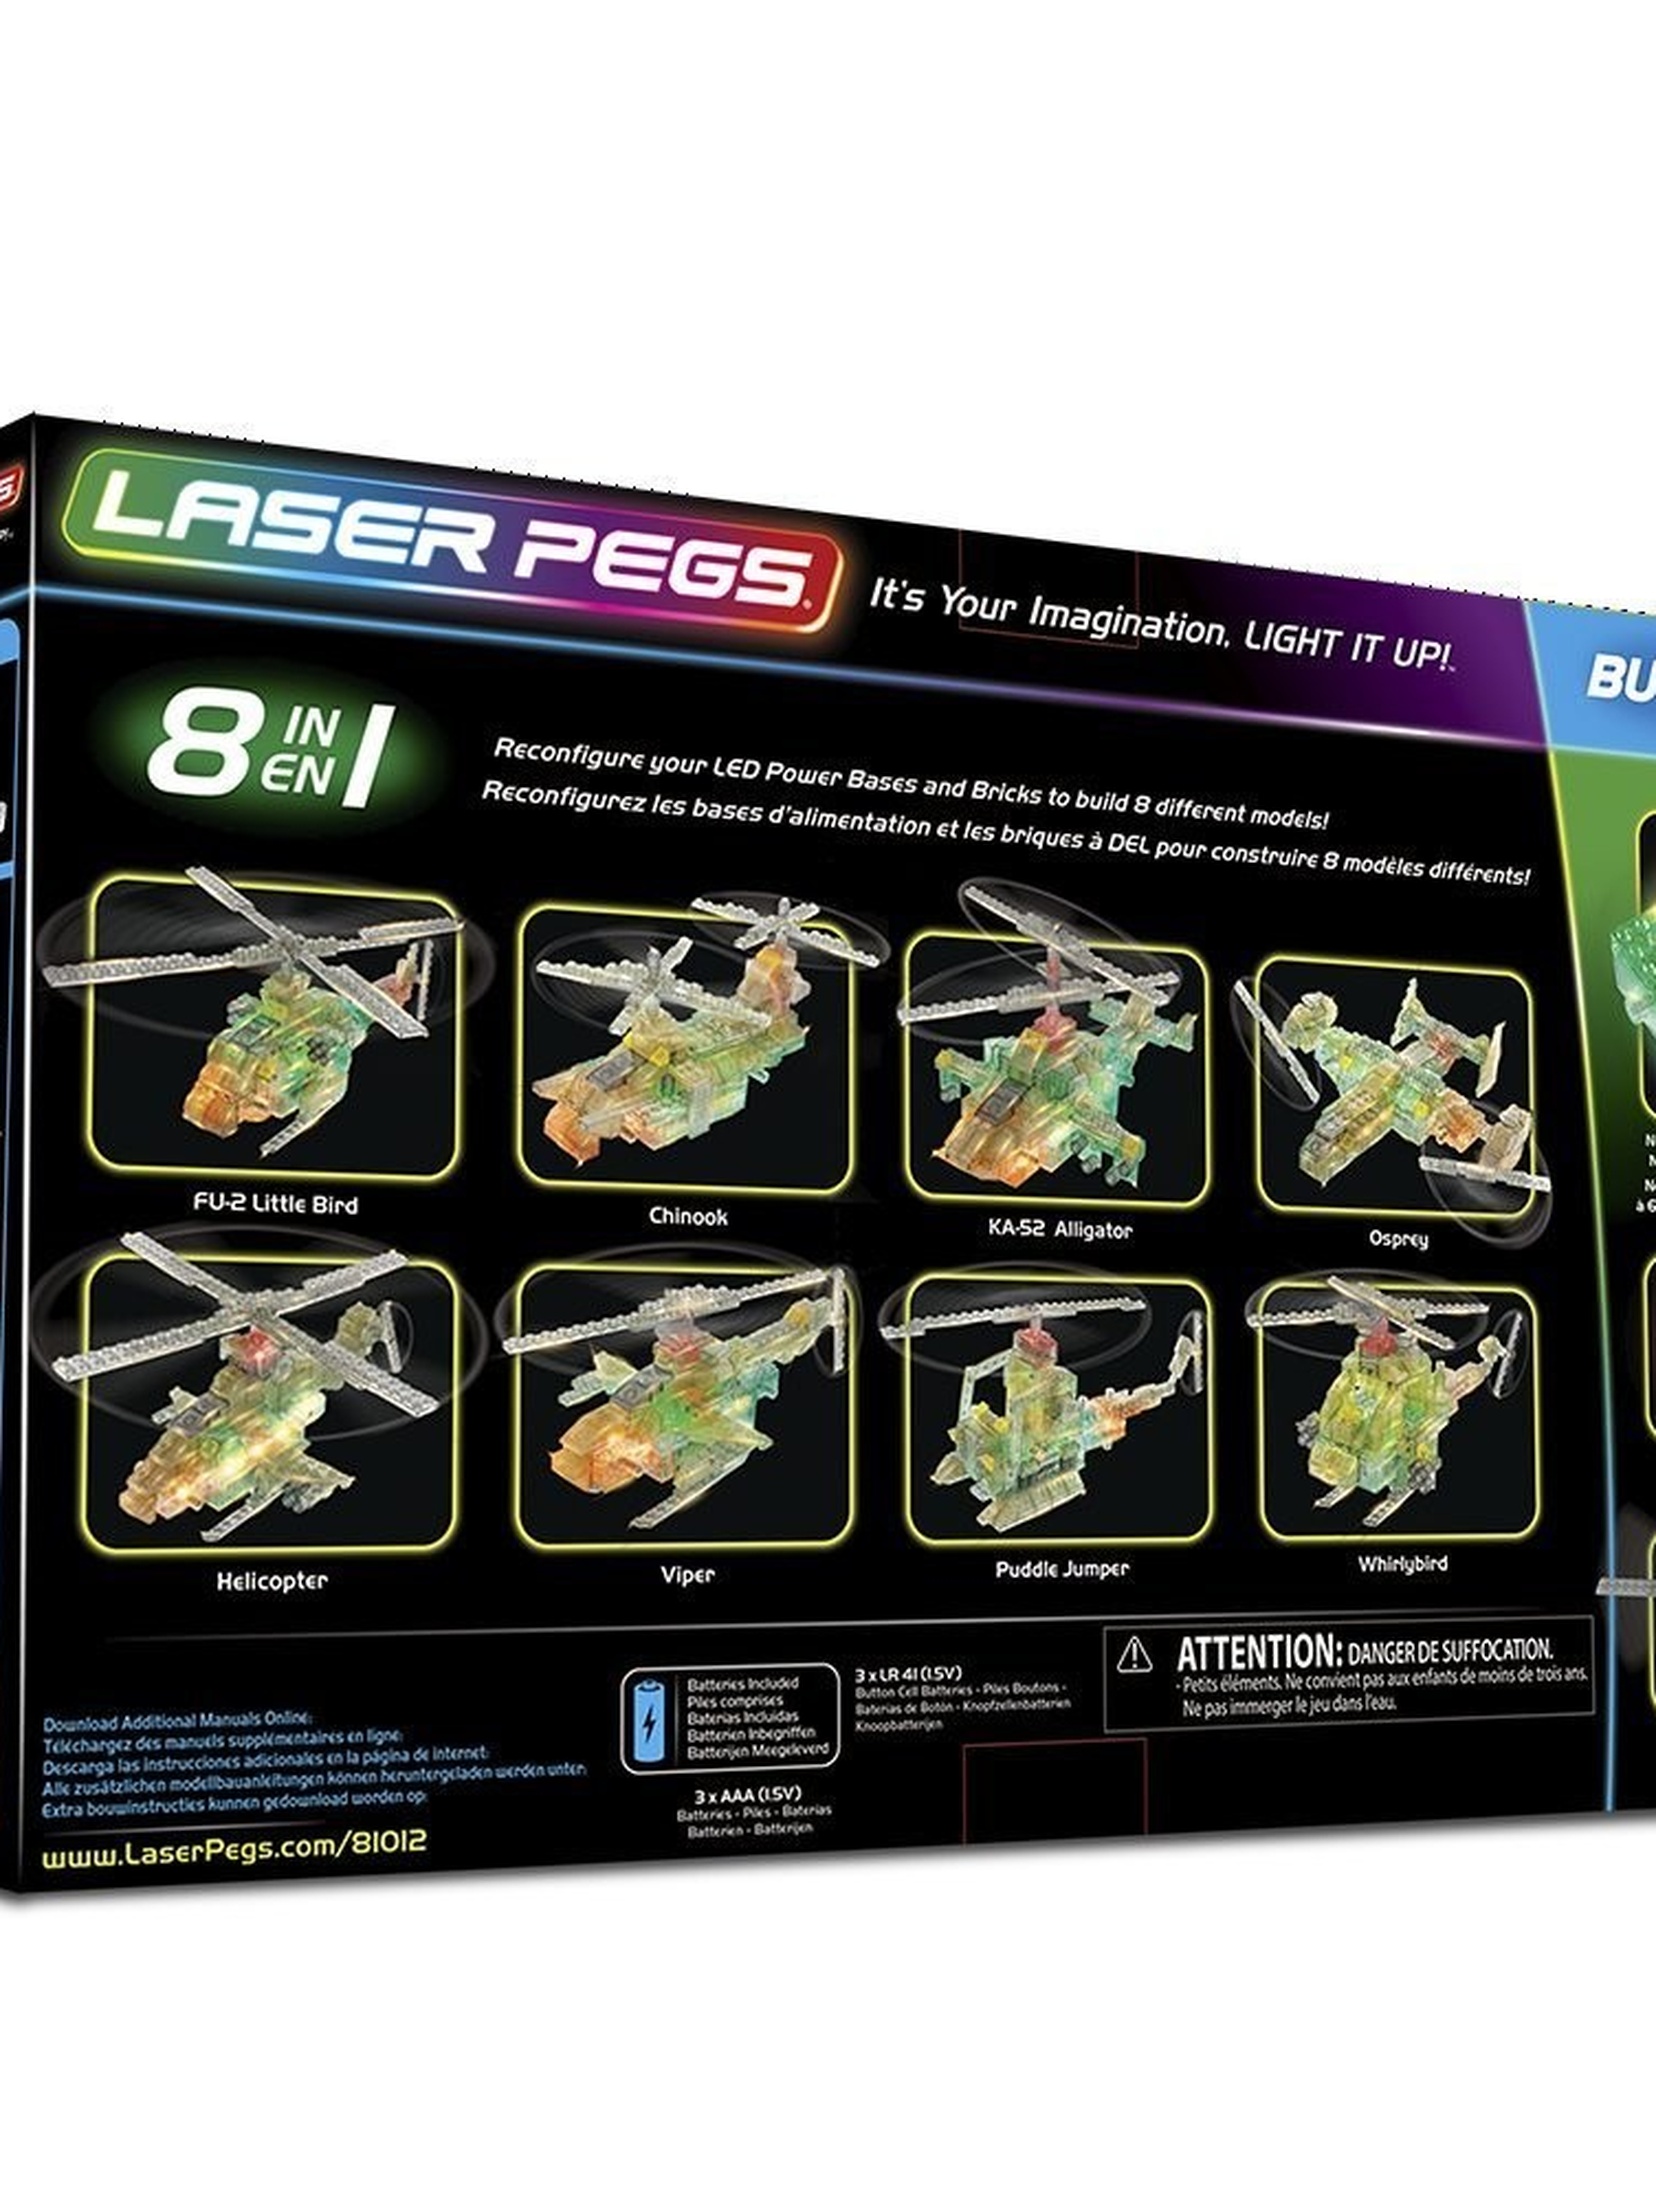 8 in 1 Helicopter